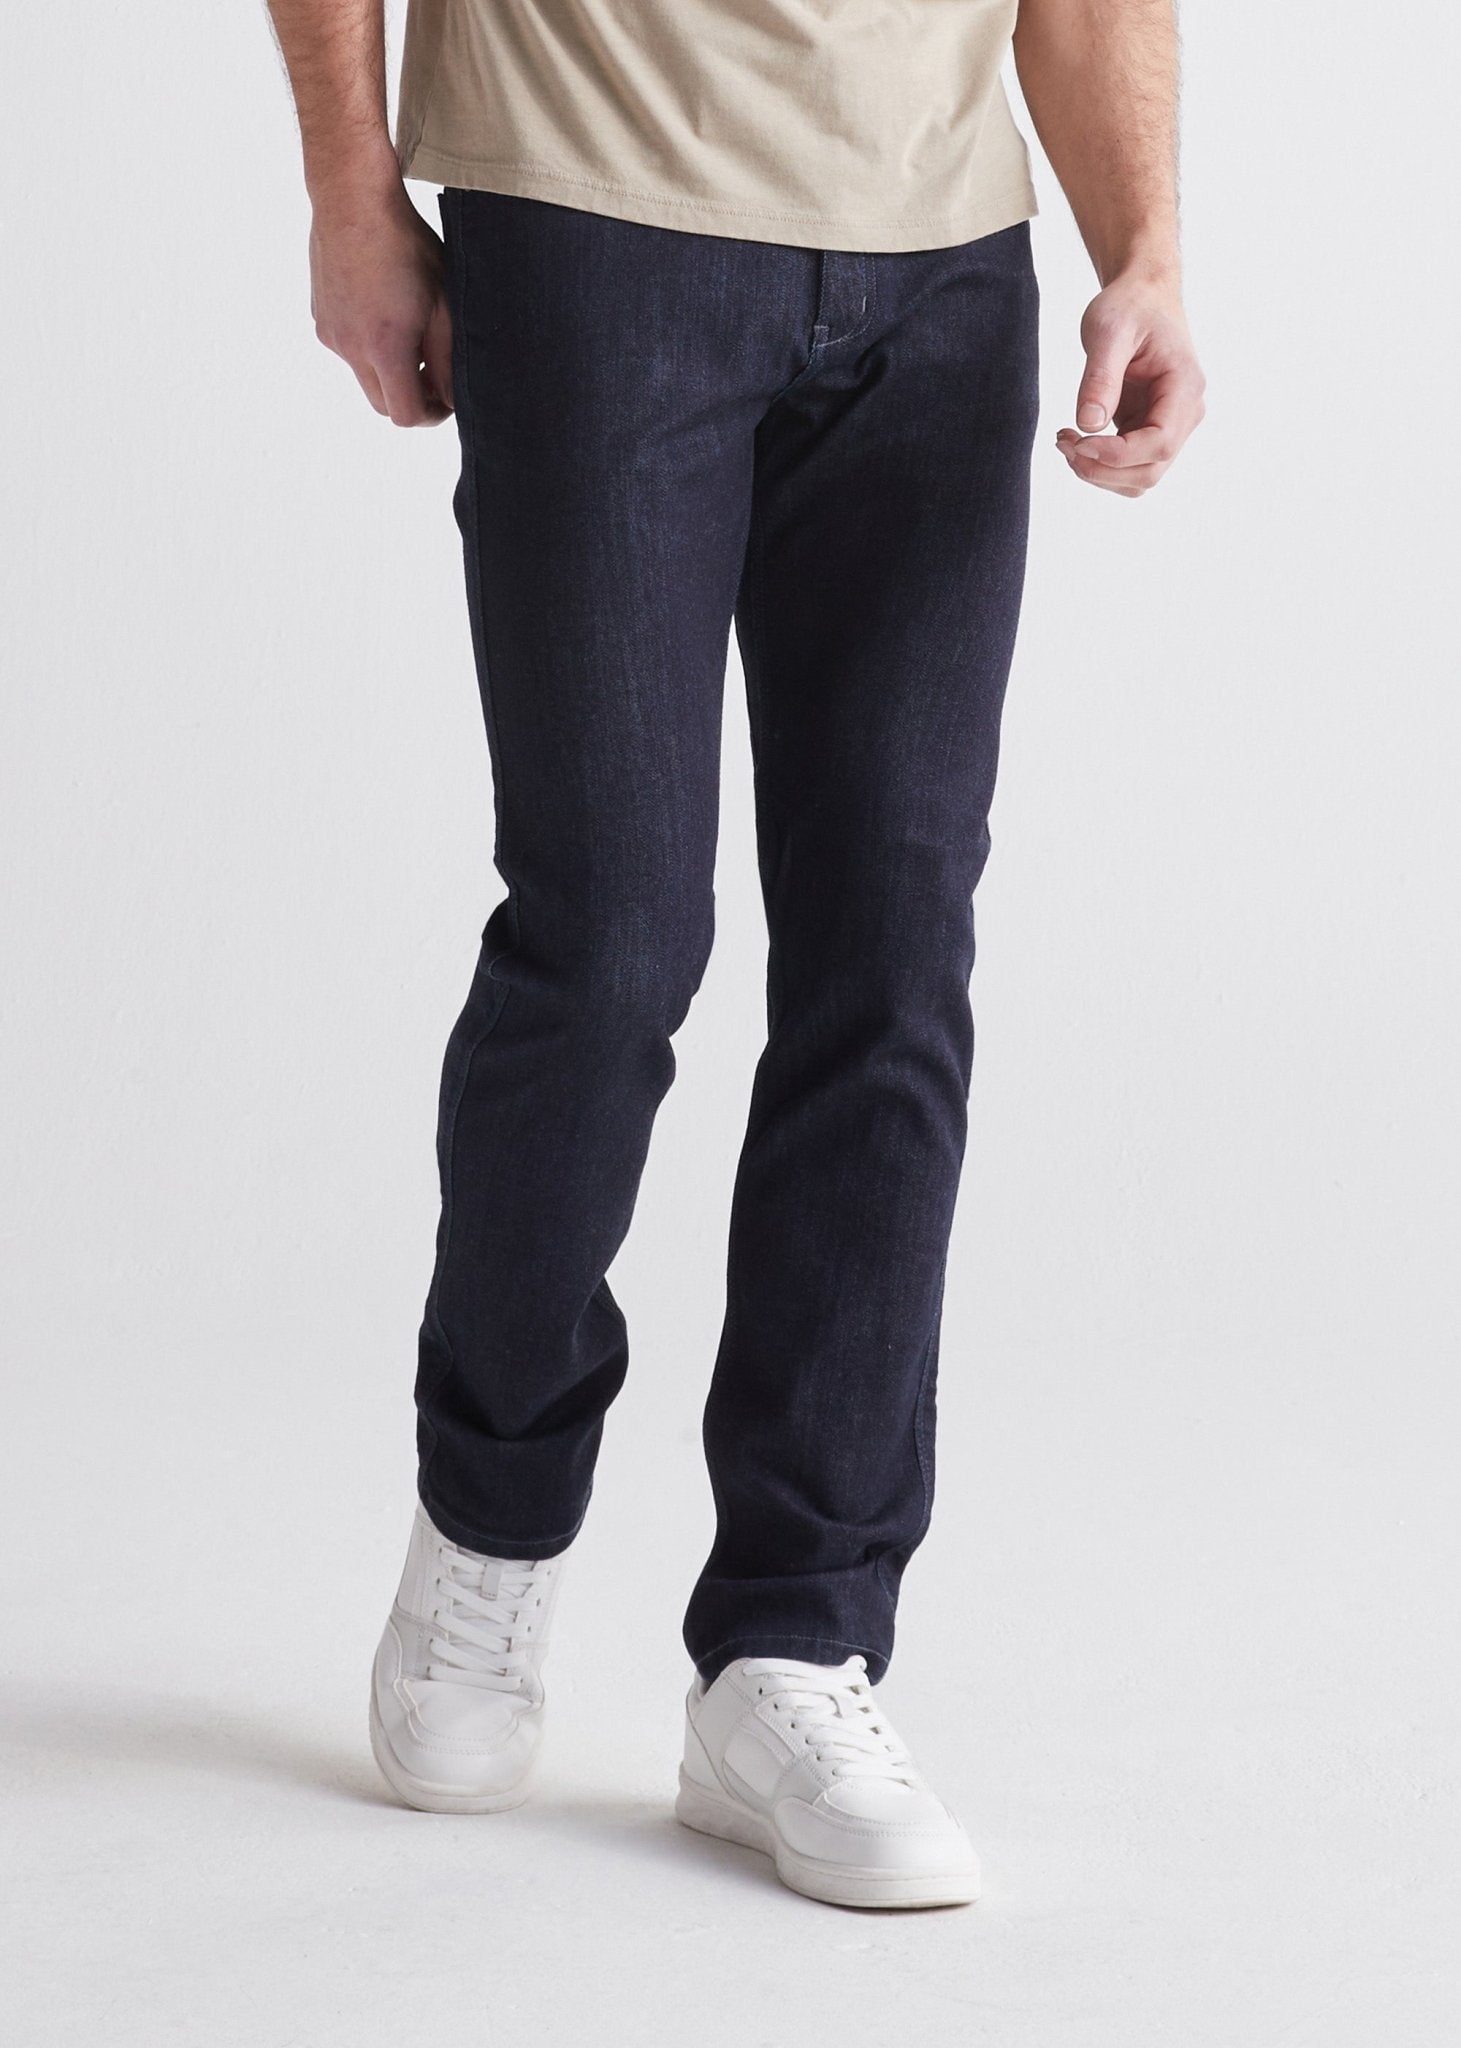 blue slim fit stretch jeans front